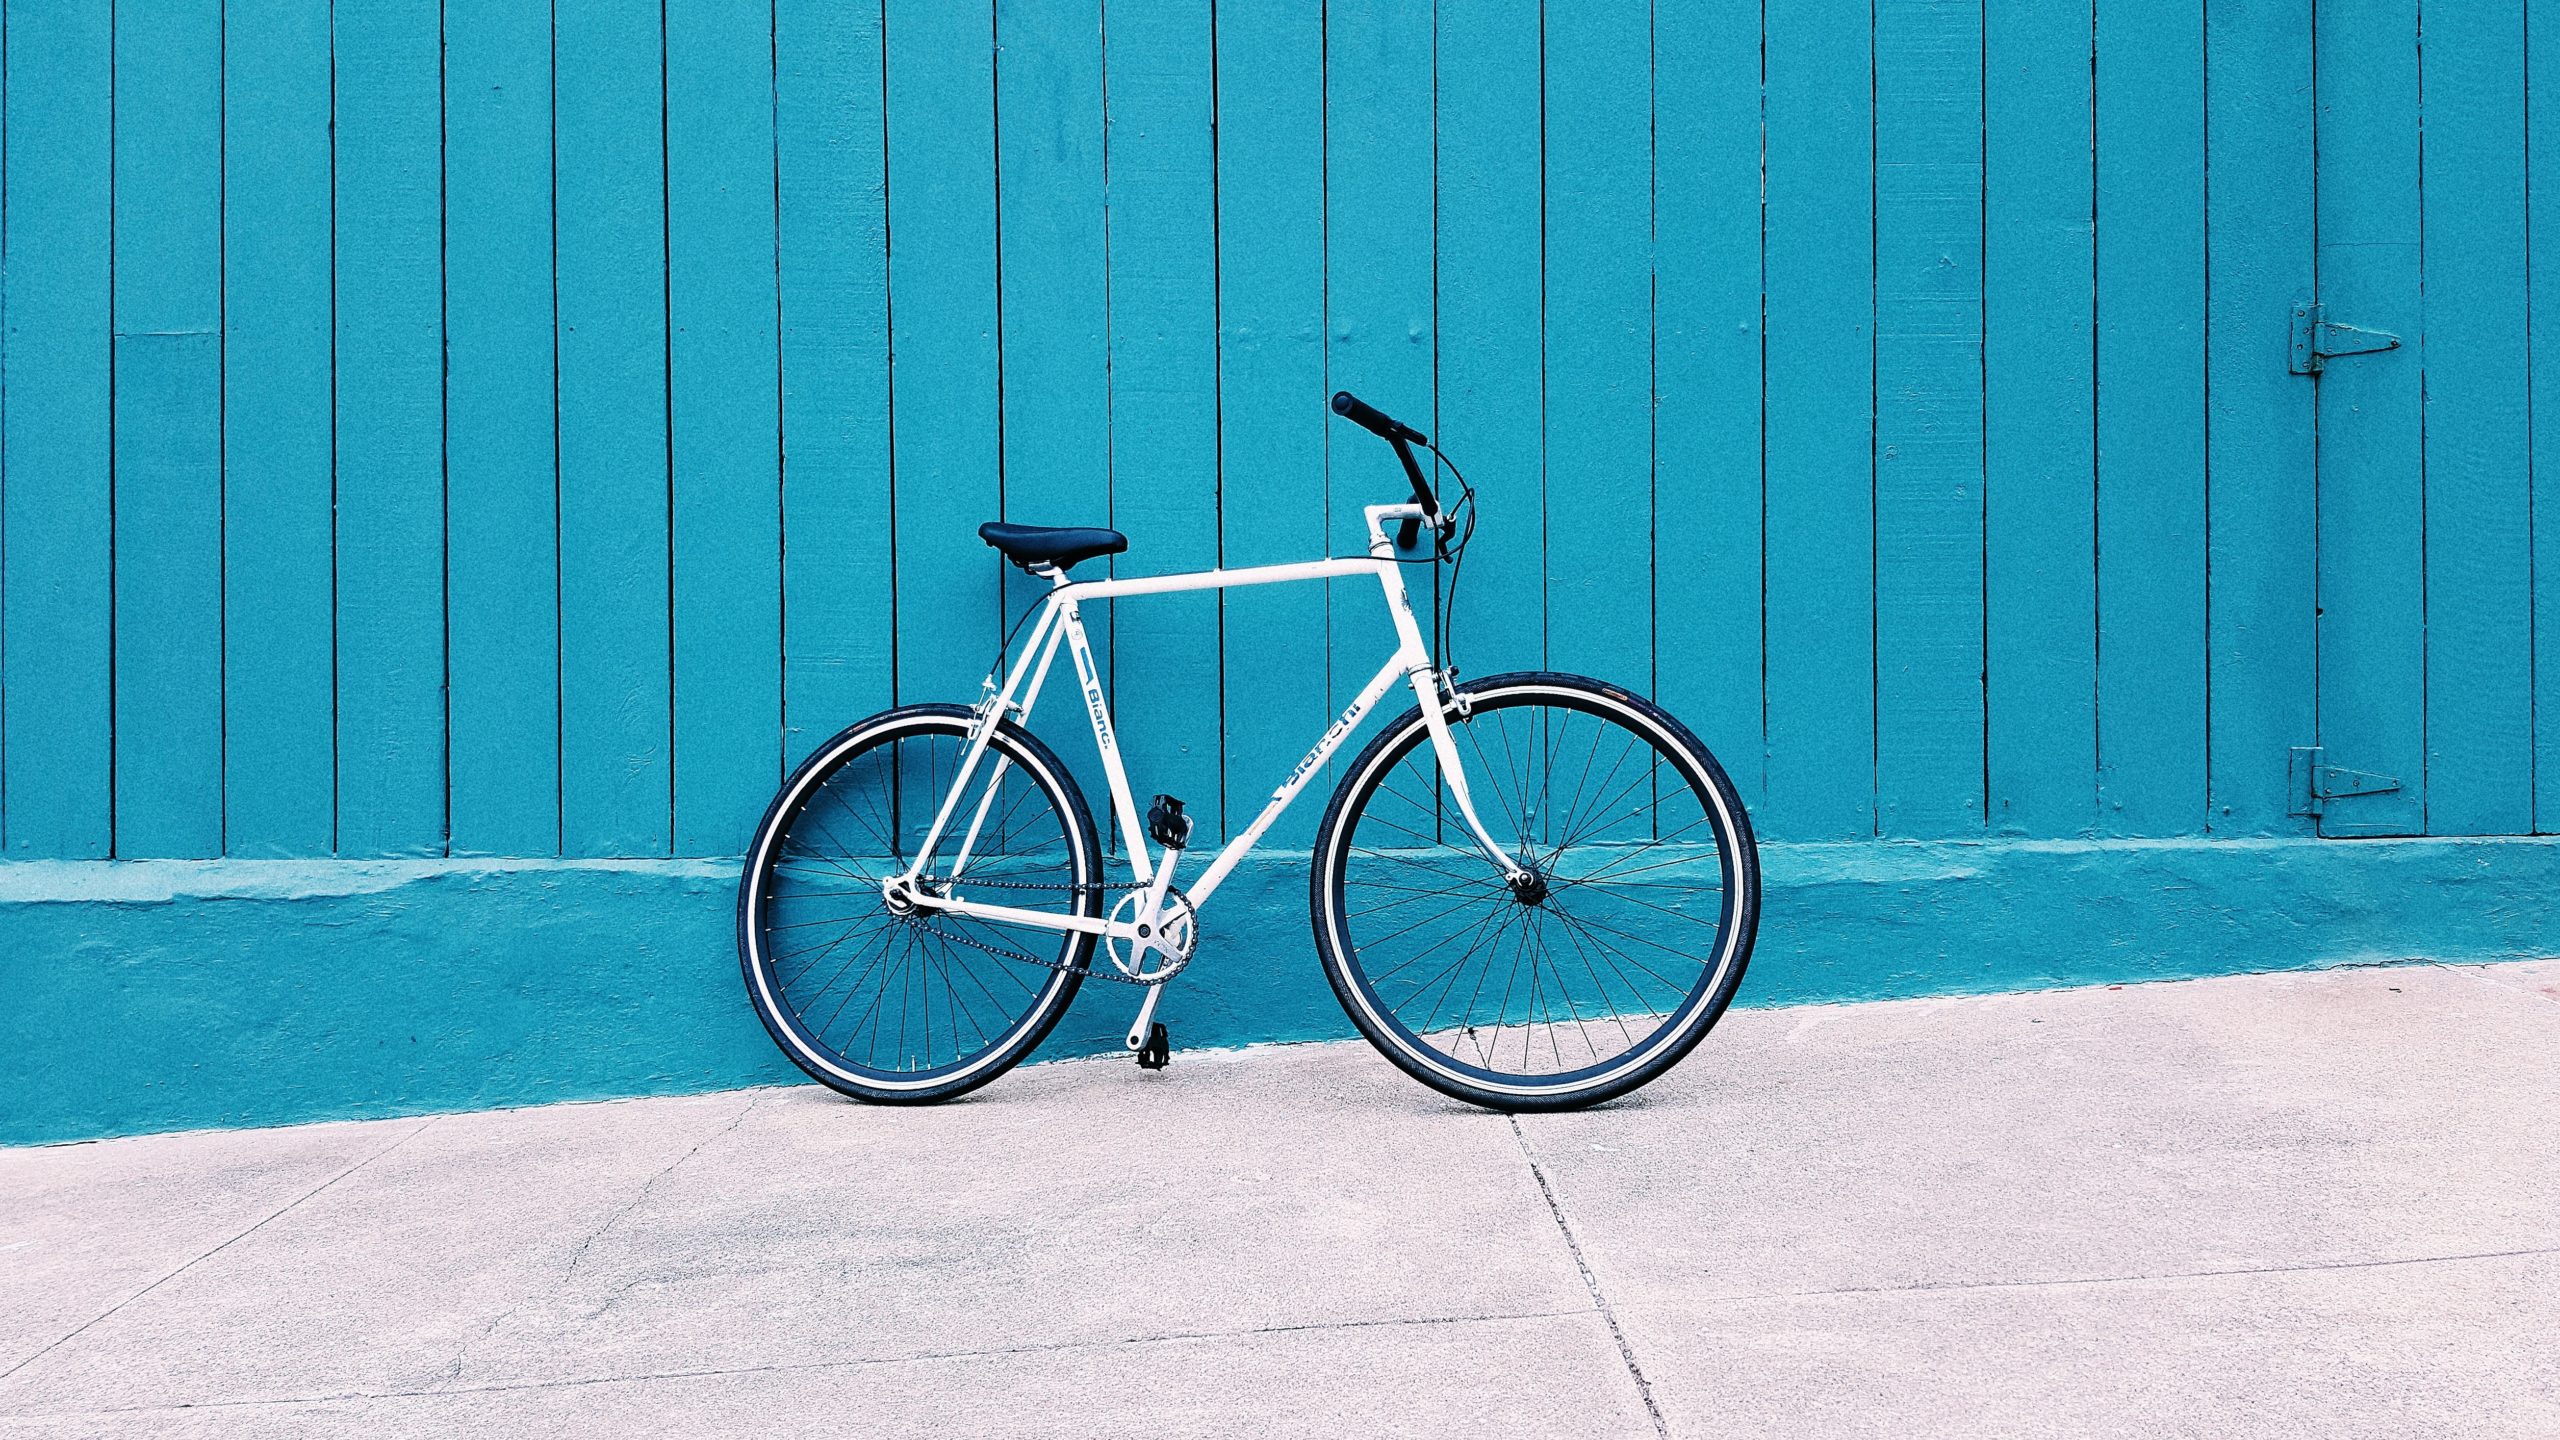 White bike leaned up against a teal wooden wall